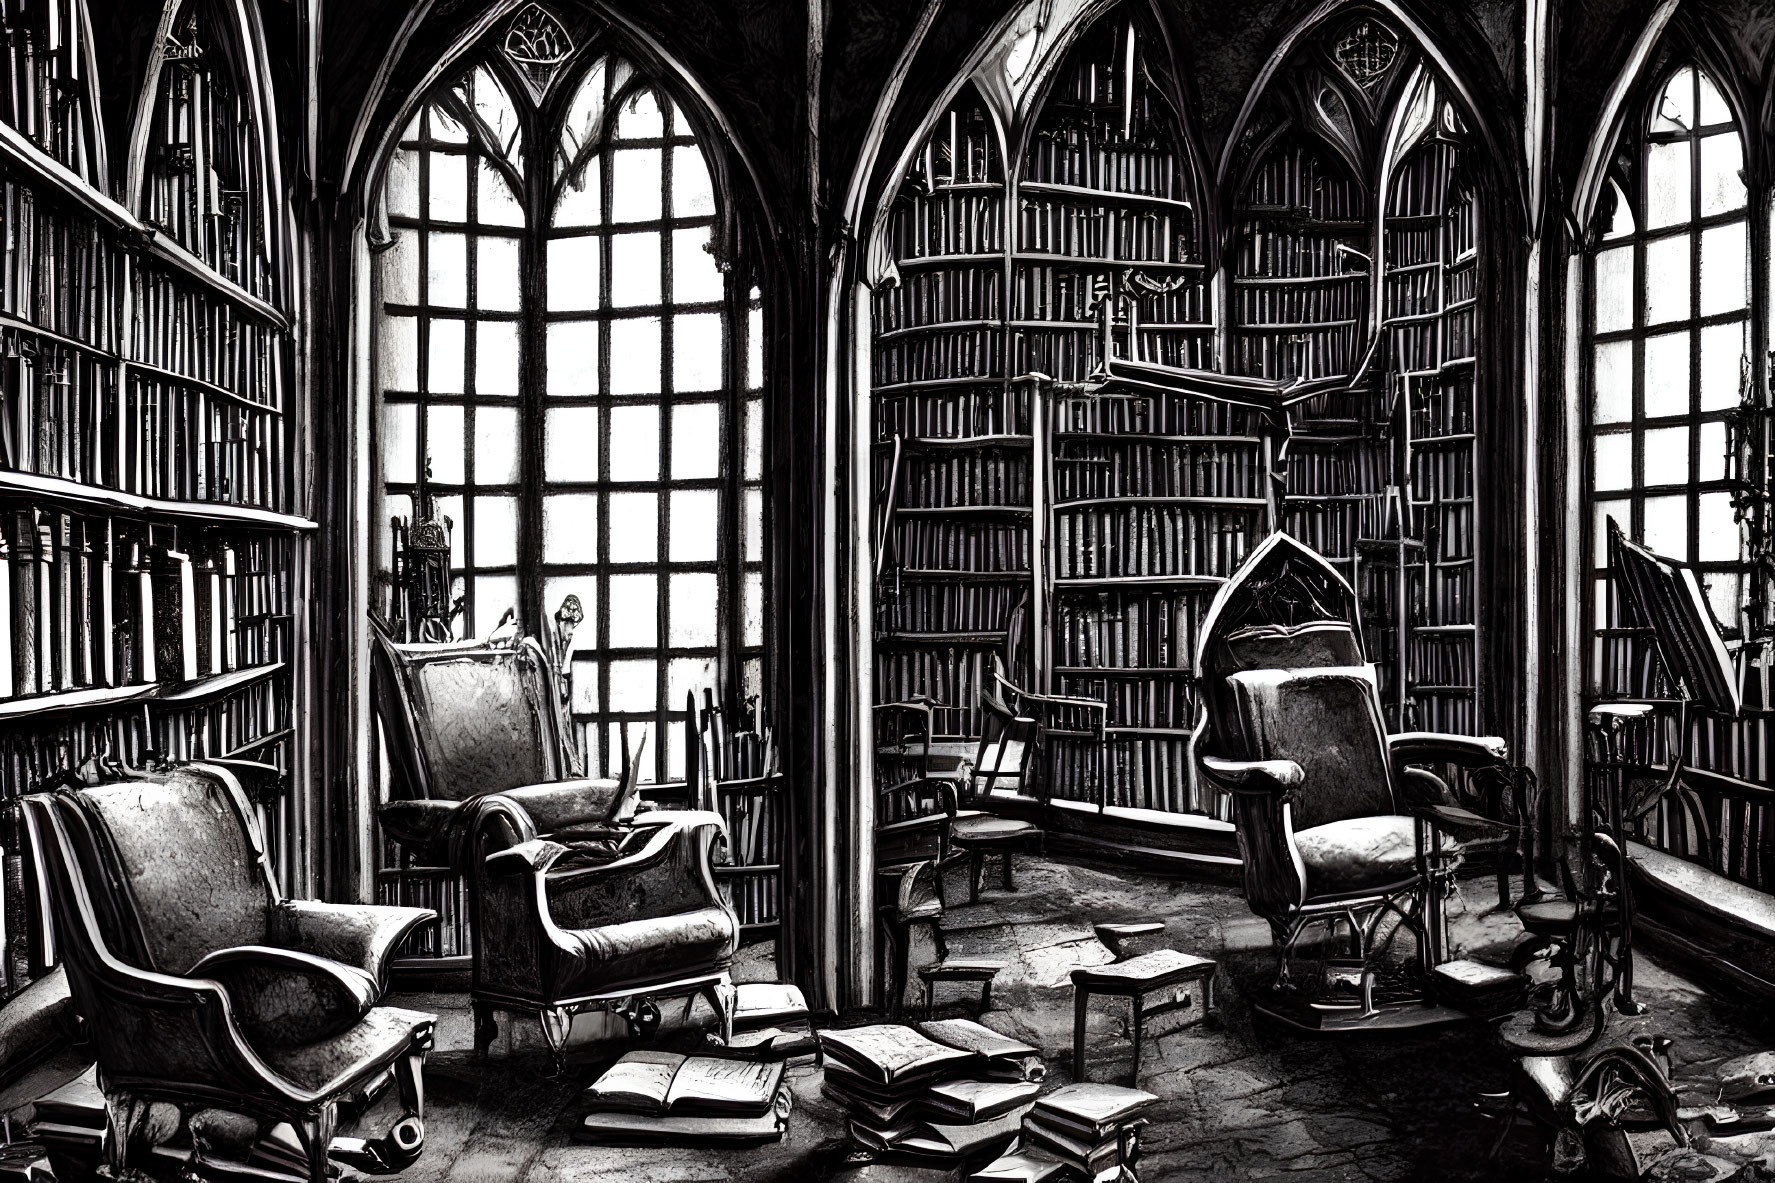 Monochrome gothic-style library illustration with tall windows and book-filled shelves